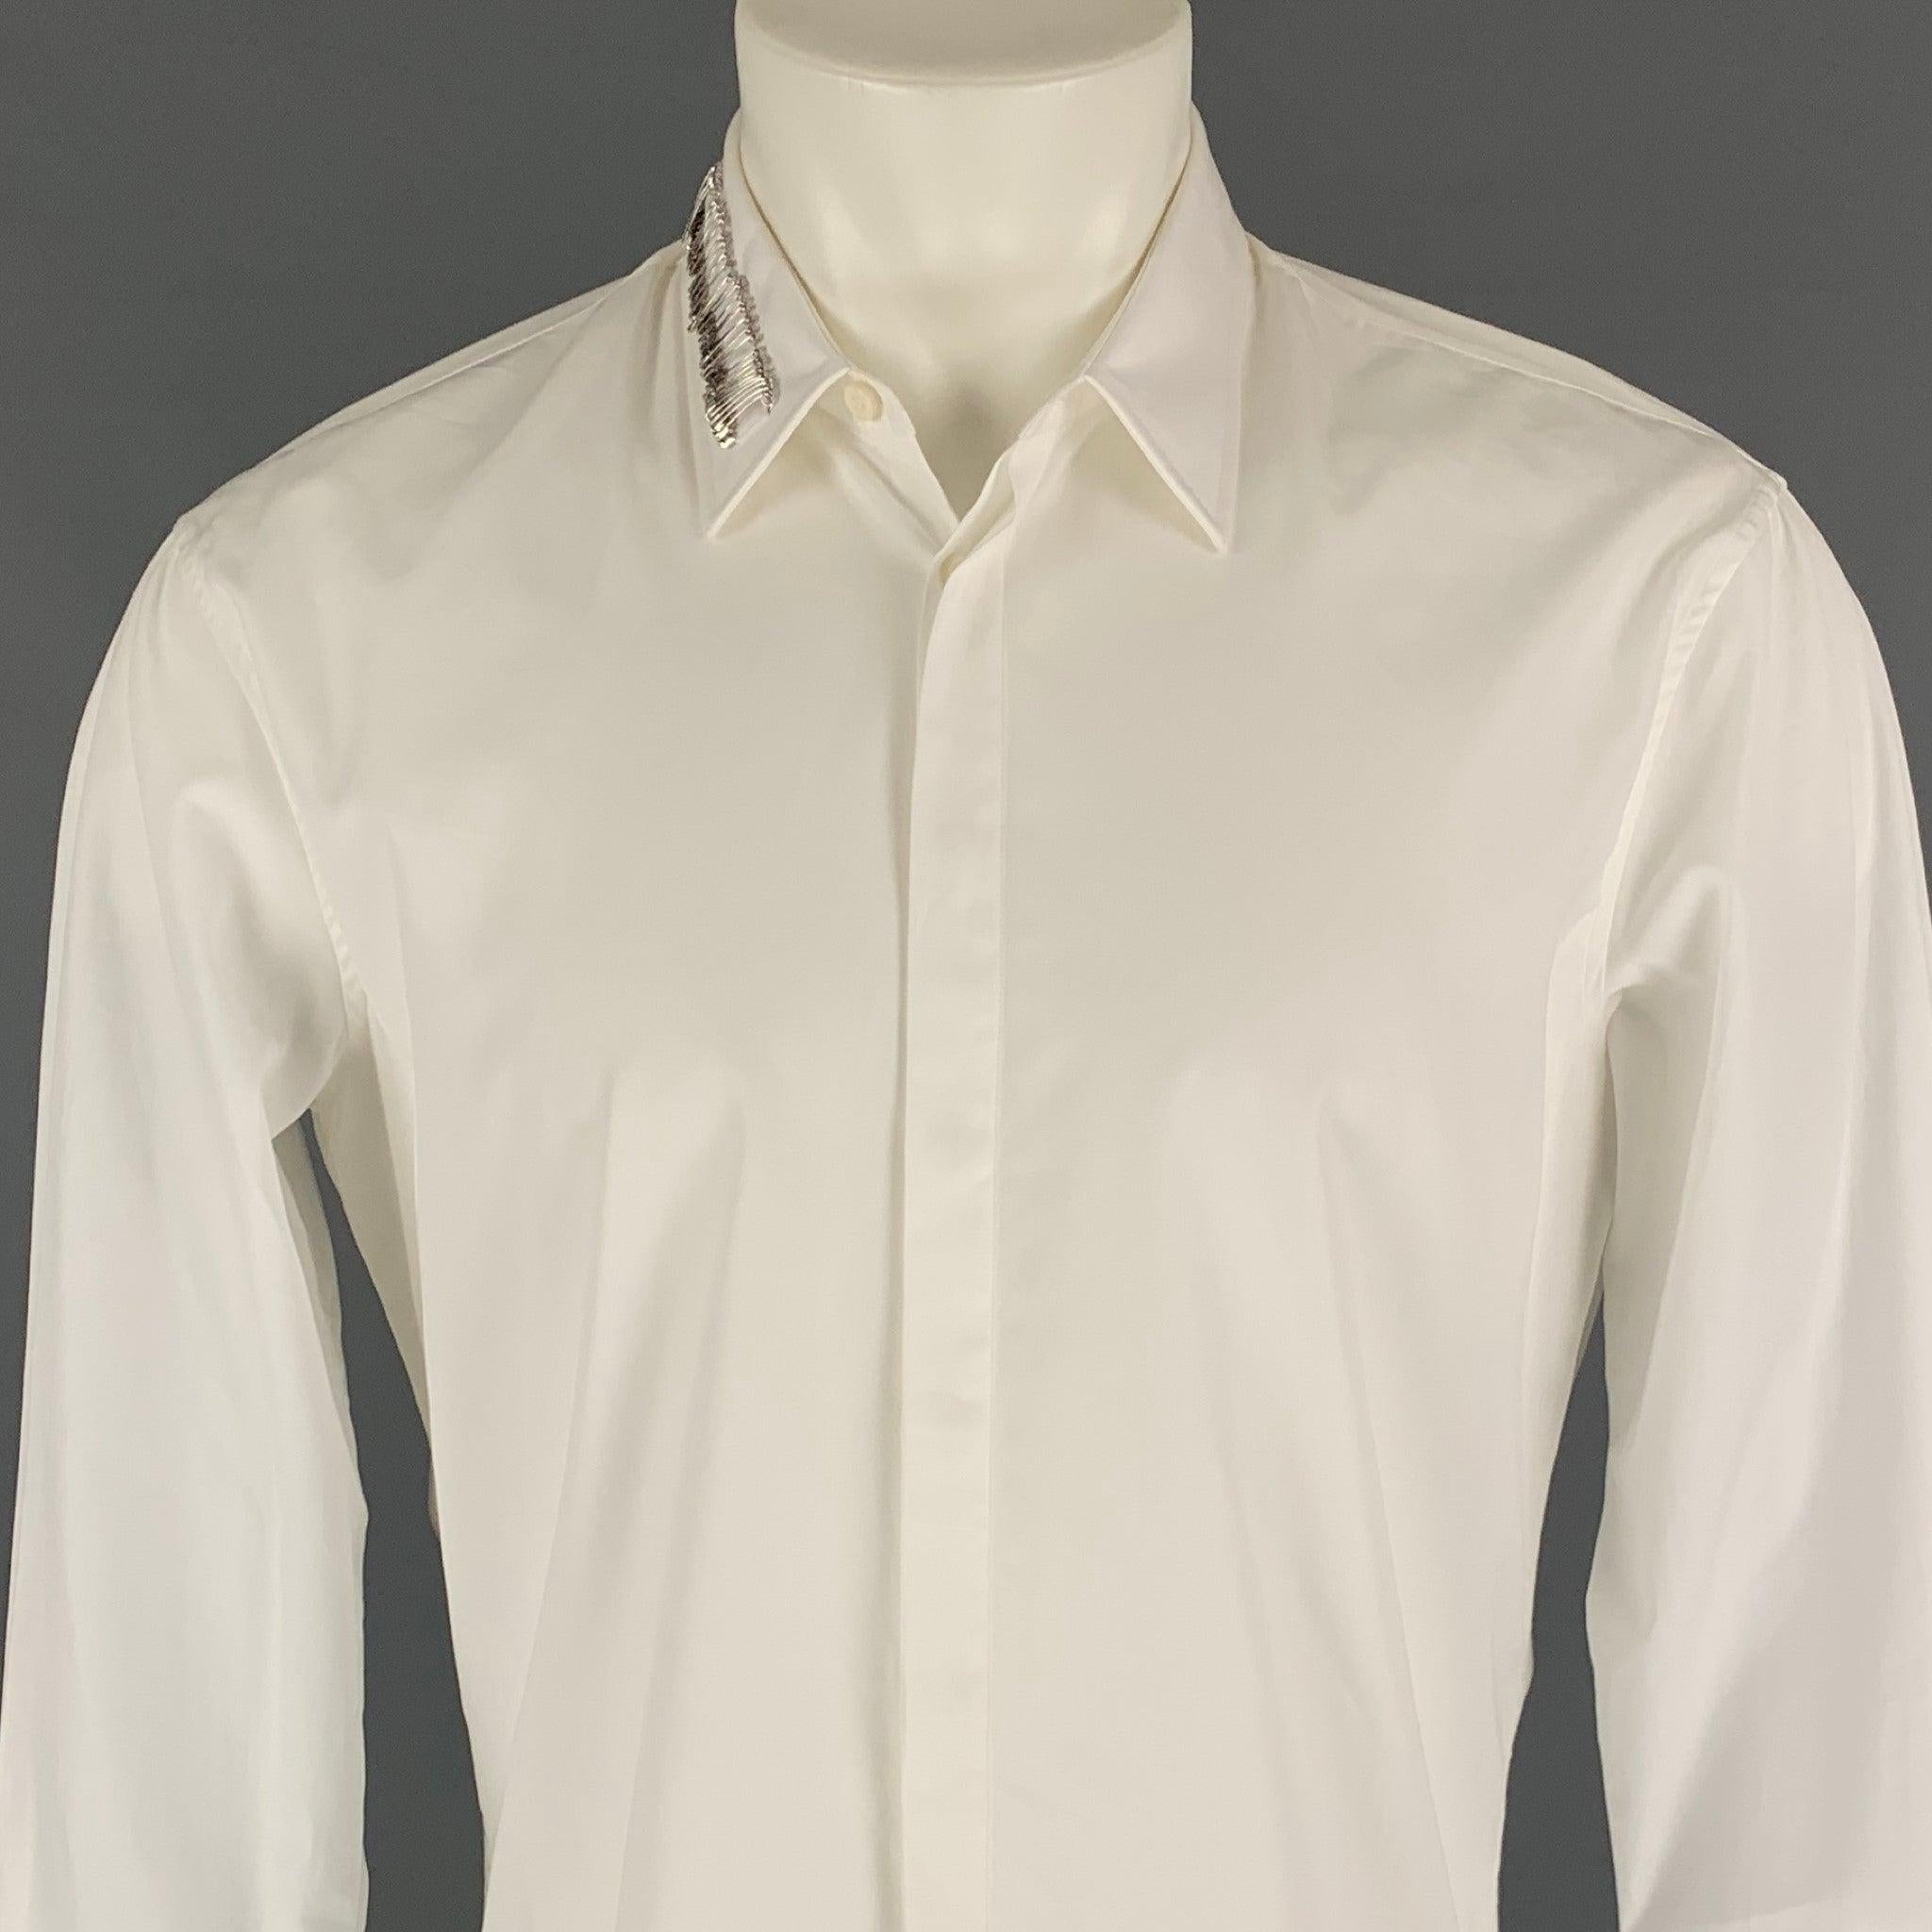 DSQUARED2 long sleeve shirt comes in a white cotton featuring a button up style, safety pin details, spread collar, and a hidden packet closure. Made in Italy.
Very Good
Pre-Owned Condition. 

Marked:   48 

Measurements: 
 
Shoulder: 19 inches 